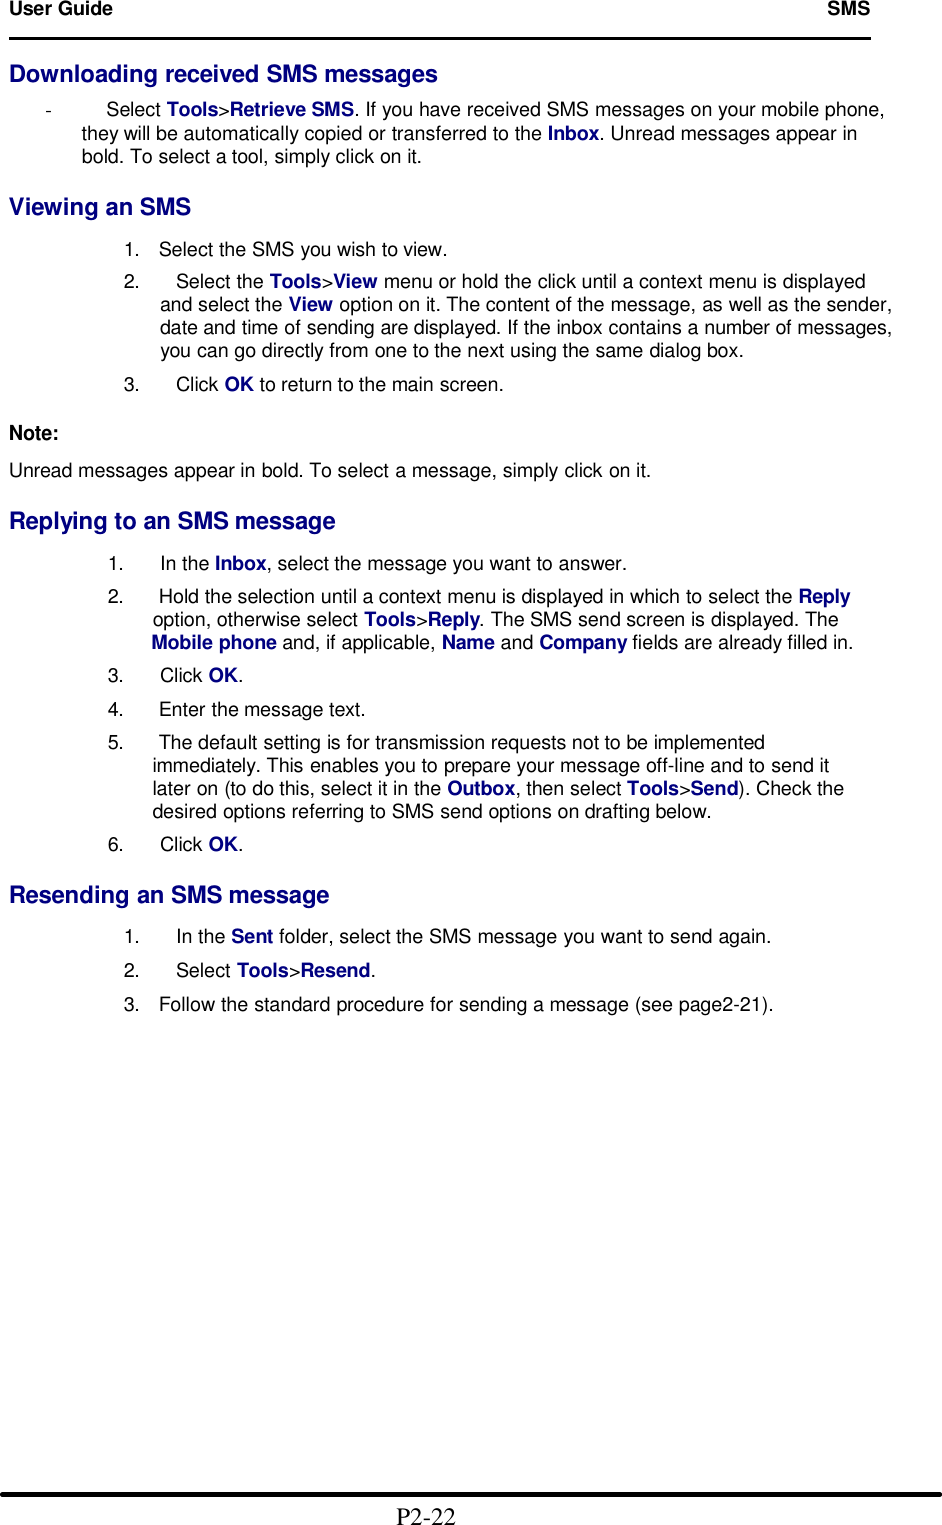 User Guide   SMS                                                                        Downloading received SMS messages  -     Select Tools&gt;Retrieve SMS. If you have received SMS messages on your mobile phone, they will be automatically copied or transferred to the Inbox. Unread messages appear in bold. To select a tool, simply click on it.  Viewing an SMS  1. Select the SMS you wish to view. 2.   Select the Tools&gt;View menu or hold the click until a context menu is displayed and select the View option on it. The content of the message, as well as the sender, date and time of sending are displayed. If the inbox contains a number of messages, you can go directly from one to the next using the same dialog box.  3.   Click OK to return to the main screen.  Note:  Unread messages appear in bold. To select a message, simply click on it.  Replying to an SMS message             1.   In the Inbox, select the message you want to answer.             2. Hold the selection until a context menu is displayed in which to select the Reply                   option, otherwise select Tools&gt;Reply. The SMS send screen is displayed. The                  Mobile phone and, if applicable, Name and Company fields are already filled in.             3.   Click OK.             4. Enter the message text.             5. The default setting is for transmission requests not to be implemented                     immediately. This enables you to prepare your message off-line and to send it                   later on (to do this, select it in the Outbox, then select Tools&gt;Send). Check the                   desired options referring to SMS send options on drafting below.             6.   Click OK.  Resending an SMS message  1.   In the Sent folder, select the SMS message you want to send again.  2.   Select Tools&gt;Resend.  3. Follow the standard procedure for sending a message (see page2-21).                                                 P2-22  